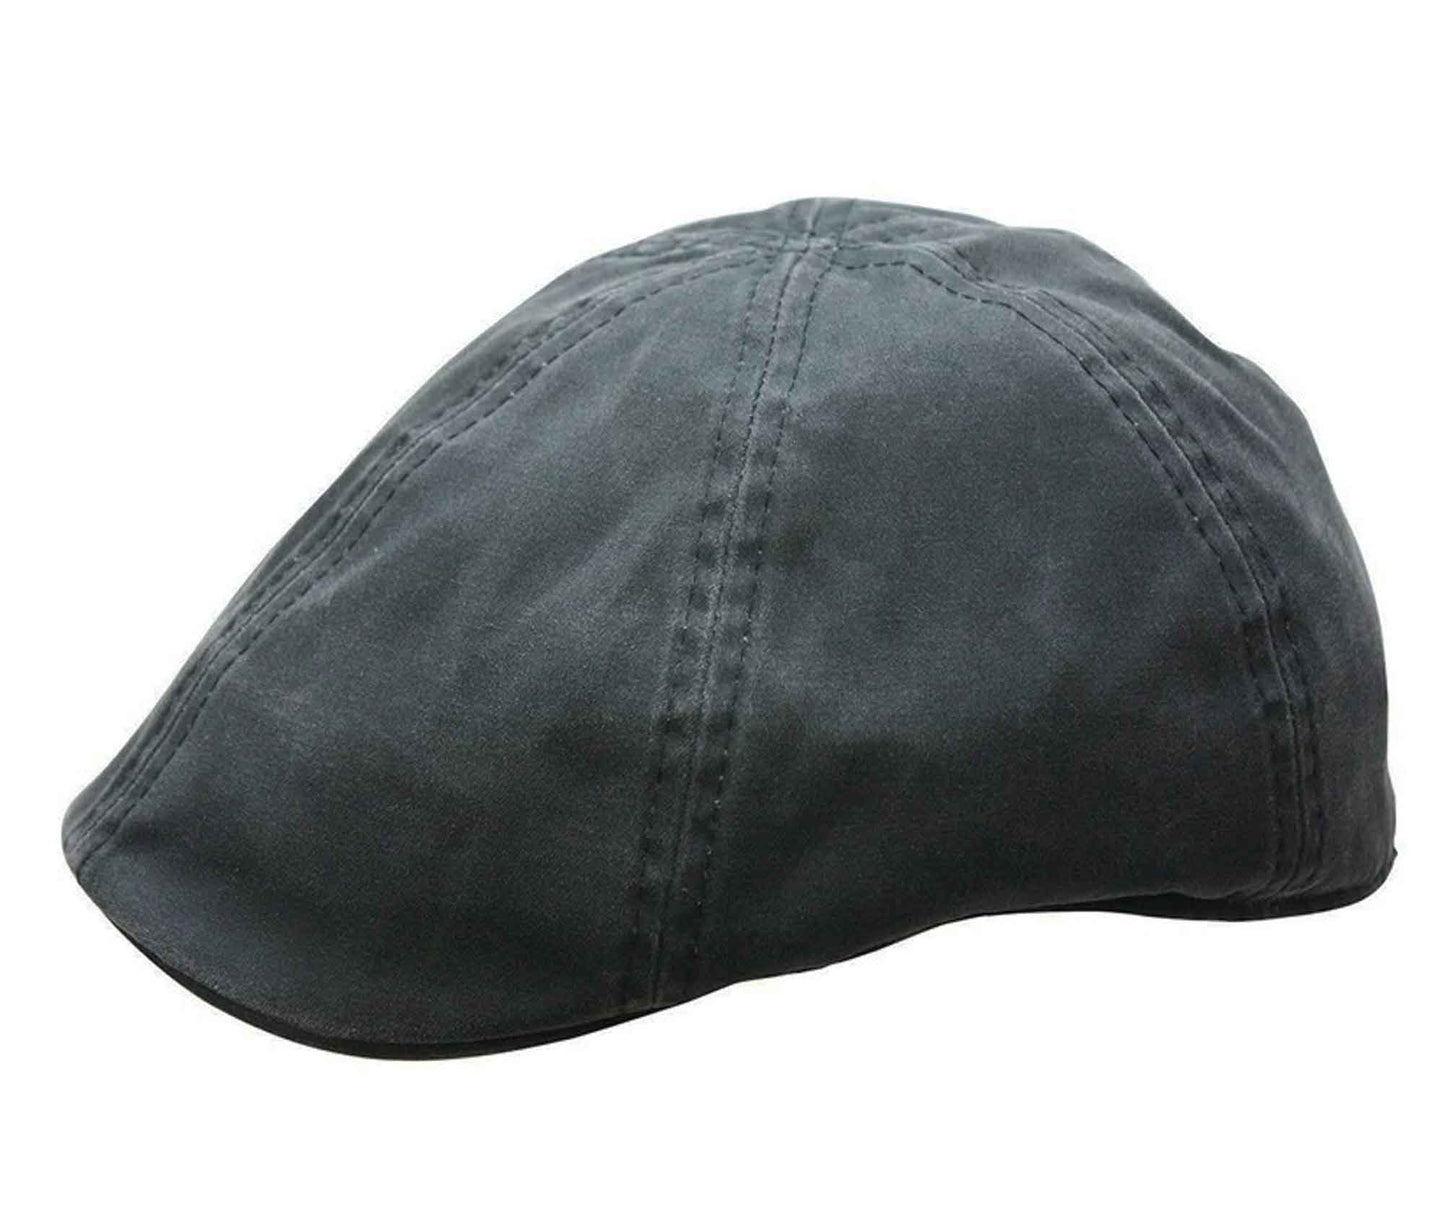 A--CONNER Merrik Weathered Cotton Ivy Cap, Style#Y1249